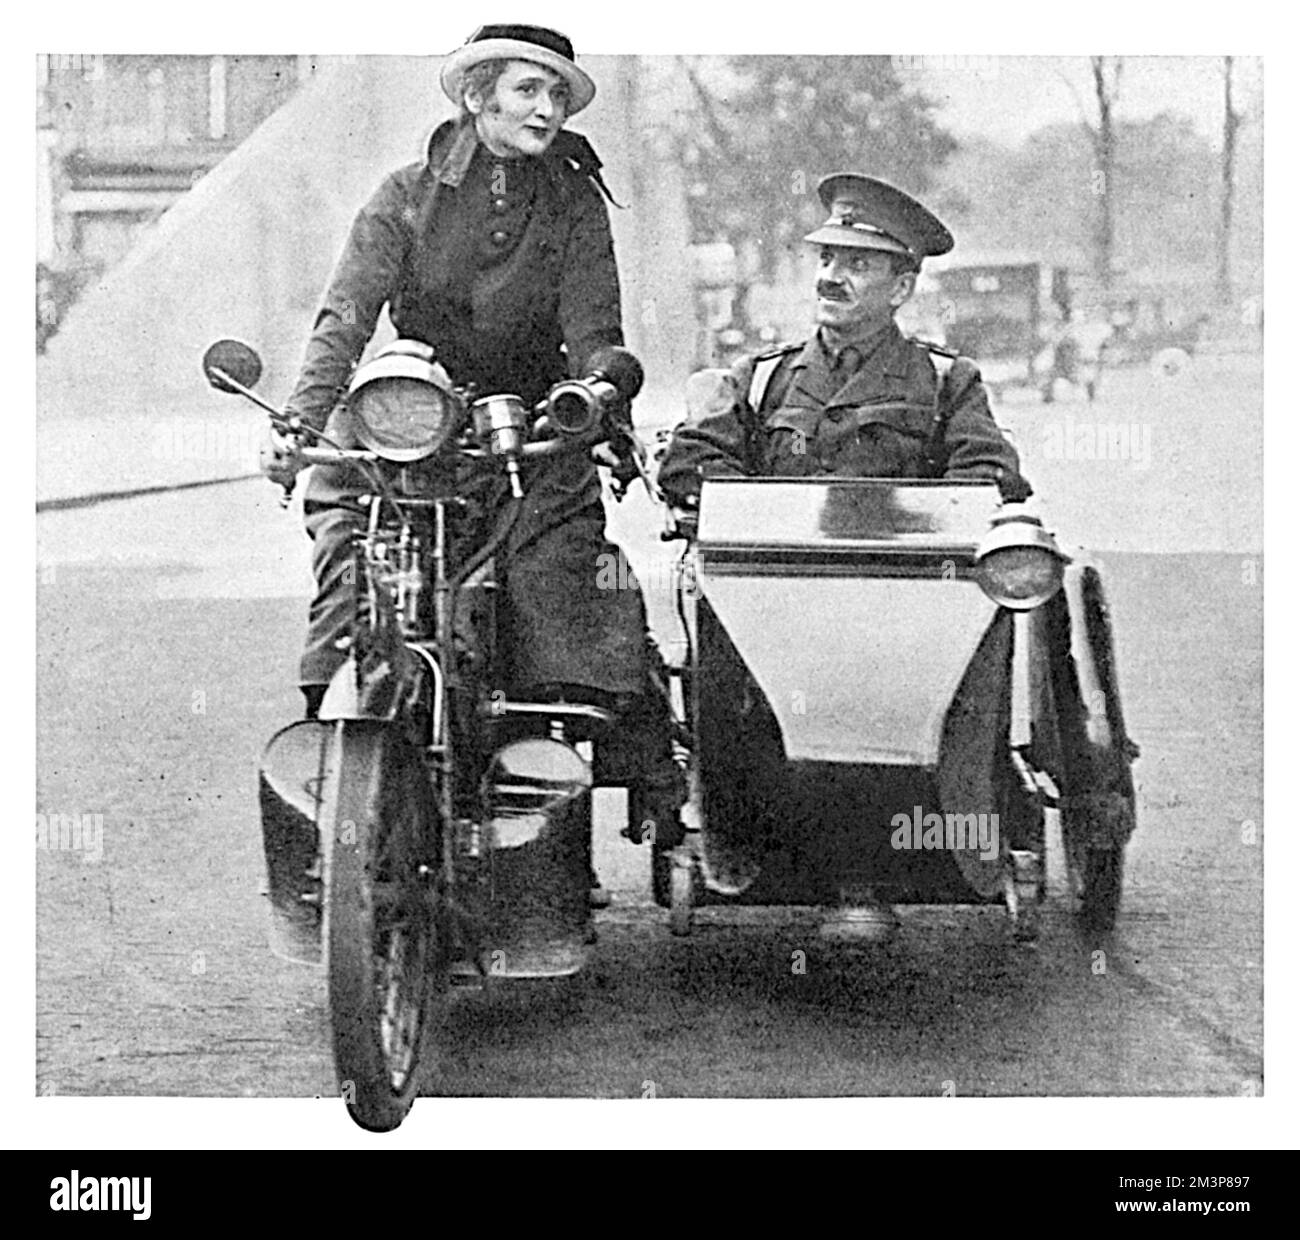 Gaby Deslys (1884 - 1920), French actress, music hall artiste and sometime lover of King Manuel II of Portugal, takes a wounded soldier for a ride in a motorcyle sidecar.  Gaby was one of the most popular entertainers of the First World War, and involved herself in a wide variety of charity work and morale-boosting activities in Britain.     Date: 1915 Stock Photo